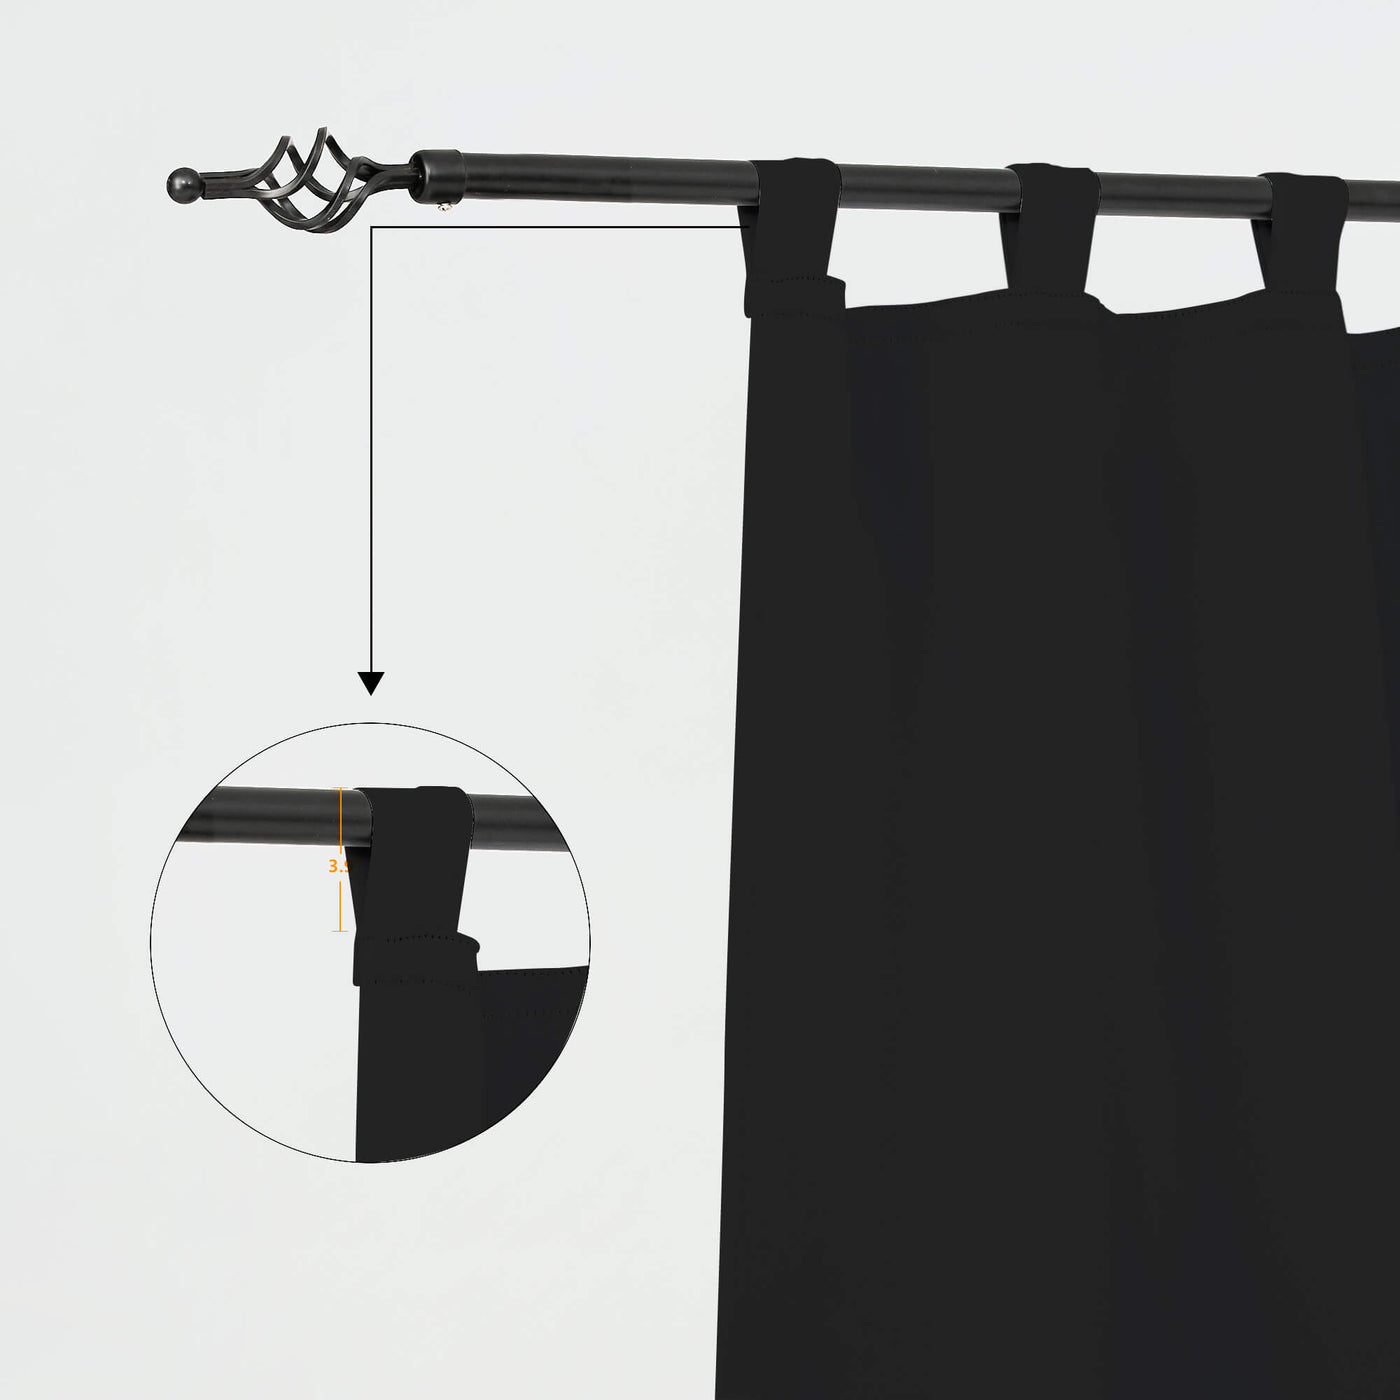 Heartcosy Blackout Curtains Black - Tab Top